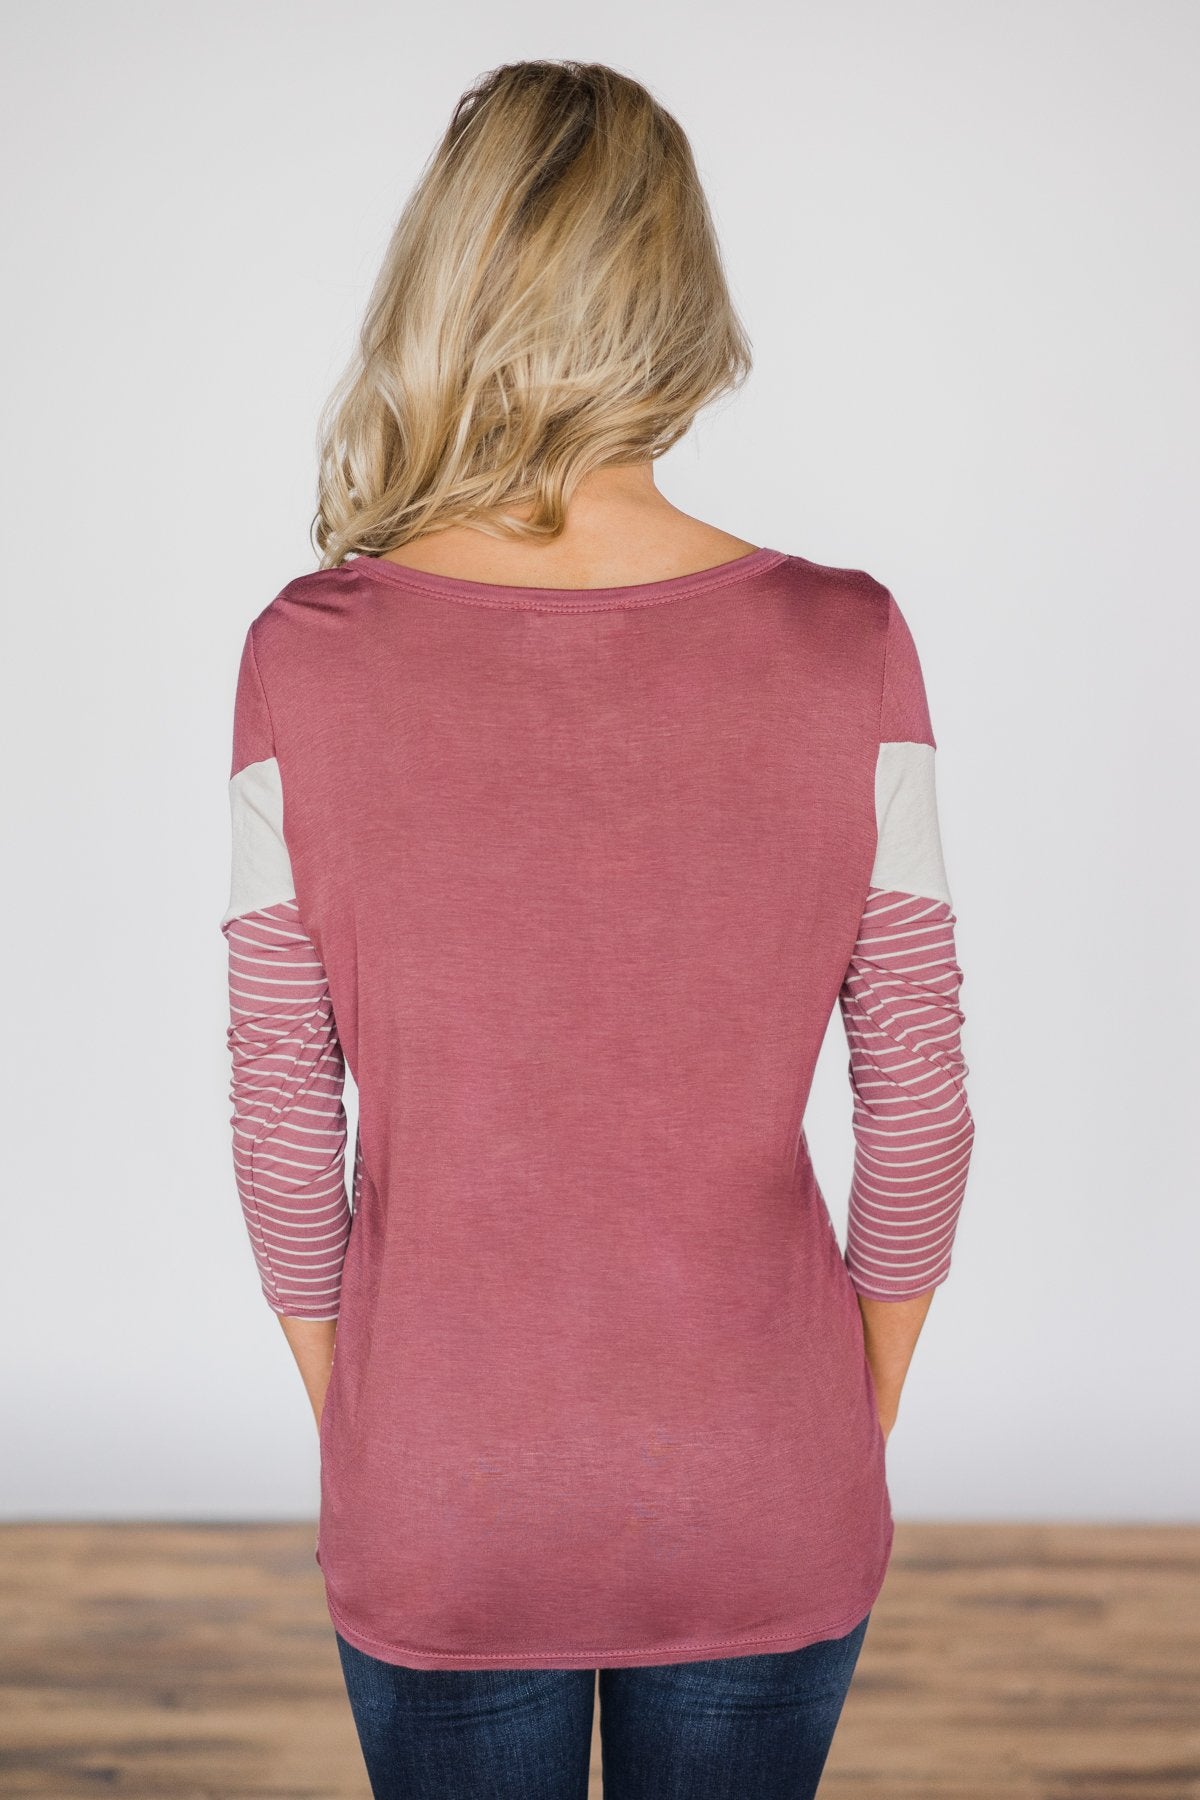 Keeping Promises Striped Top ~ Wild Strawberry